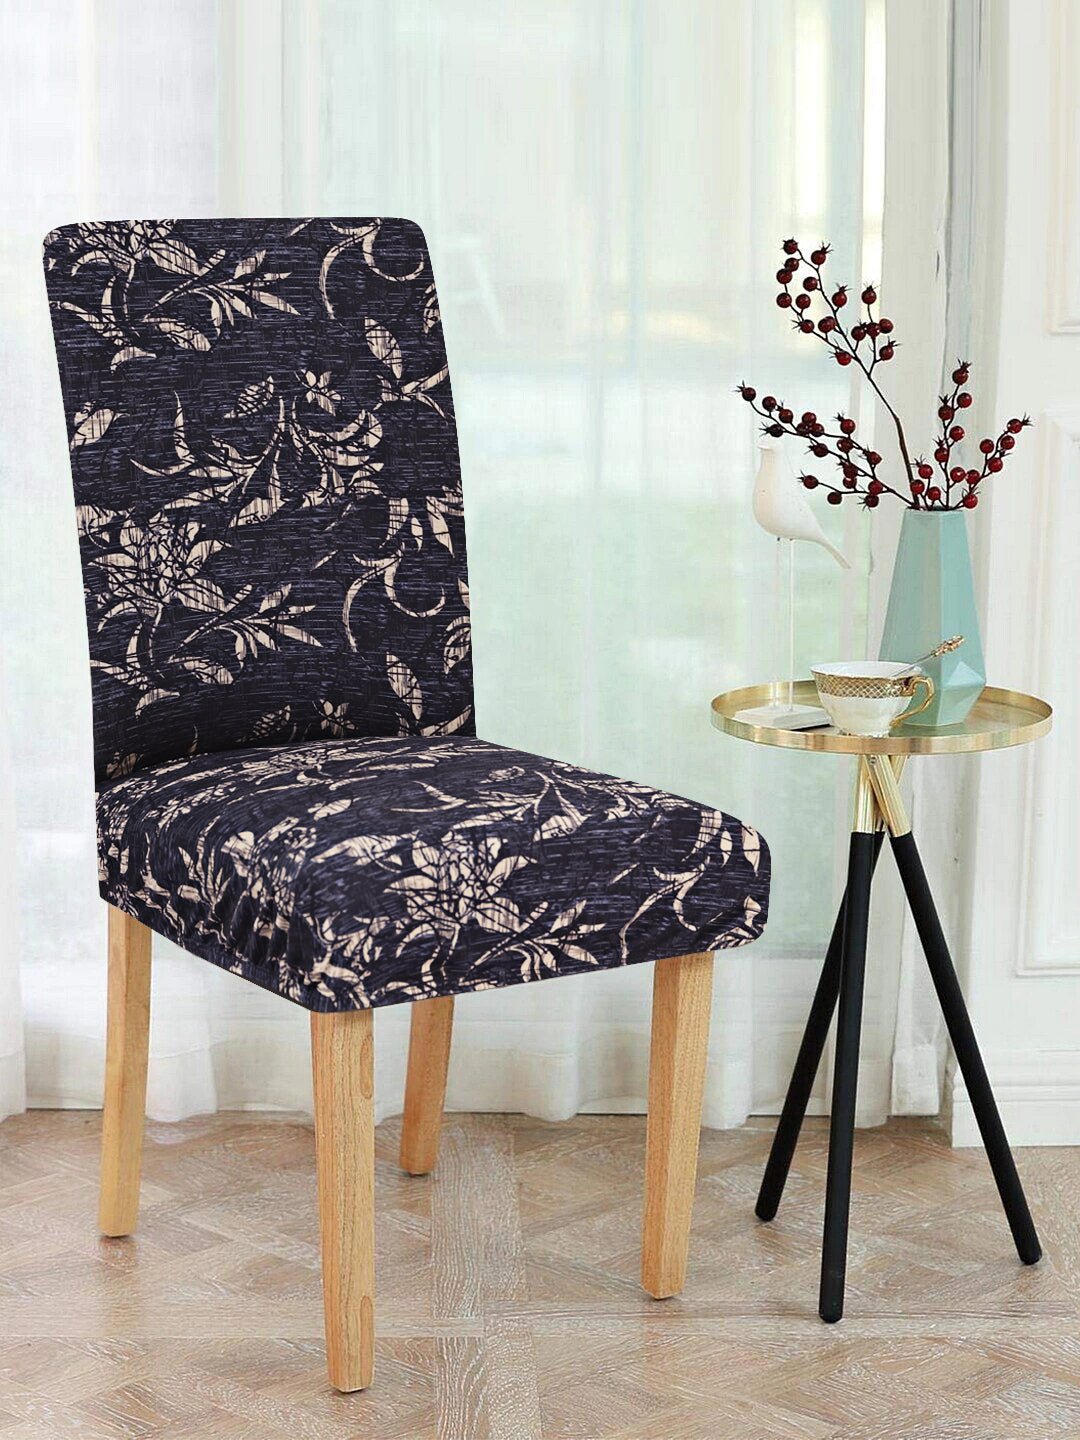 Magic Universal Chair Cover - Black & Beige Abstract Printed - DivineTrendz, Small bedroom chair covers, bedroom chair slip covers, chairs covers near me, chairs covers set of 6, chair slipcovers for dining table, chair covers set of 6 in india,chair covers online,